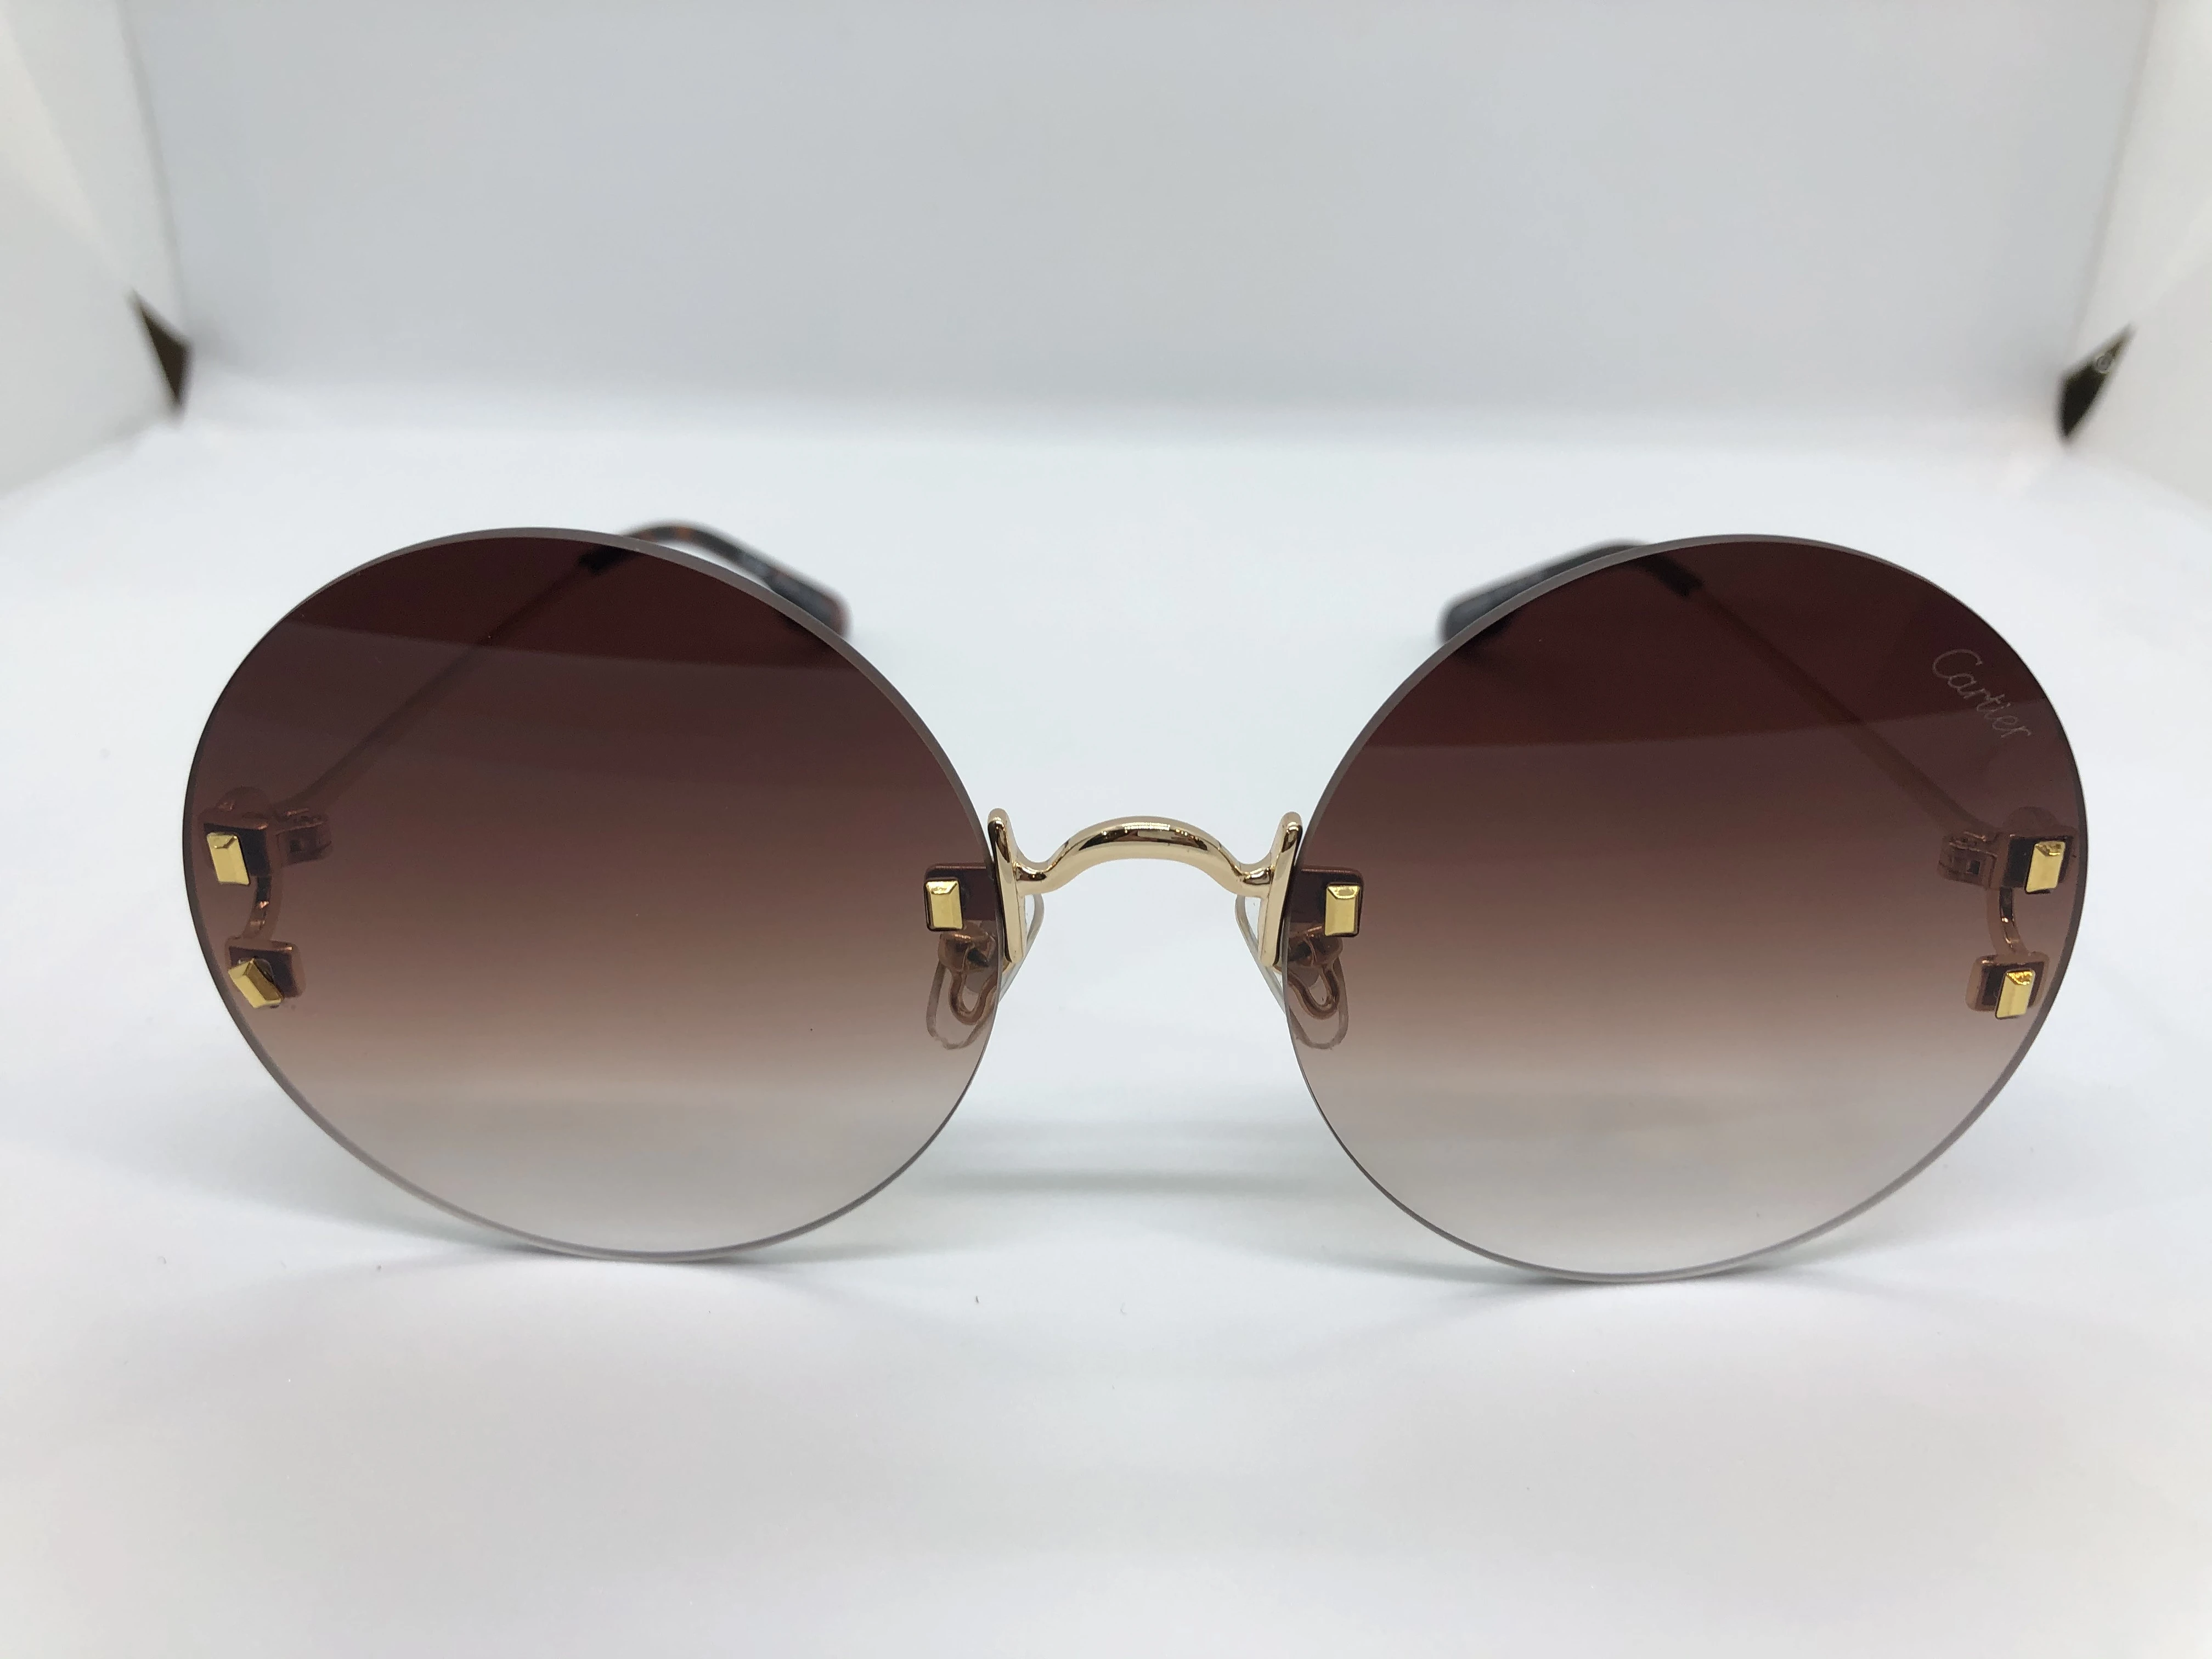 Cartier sunglasses - without frame - with brown gradient lenses - and golden metal arm - for women